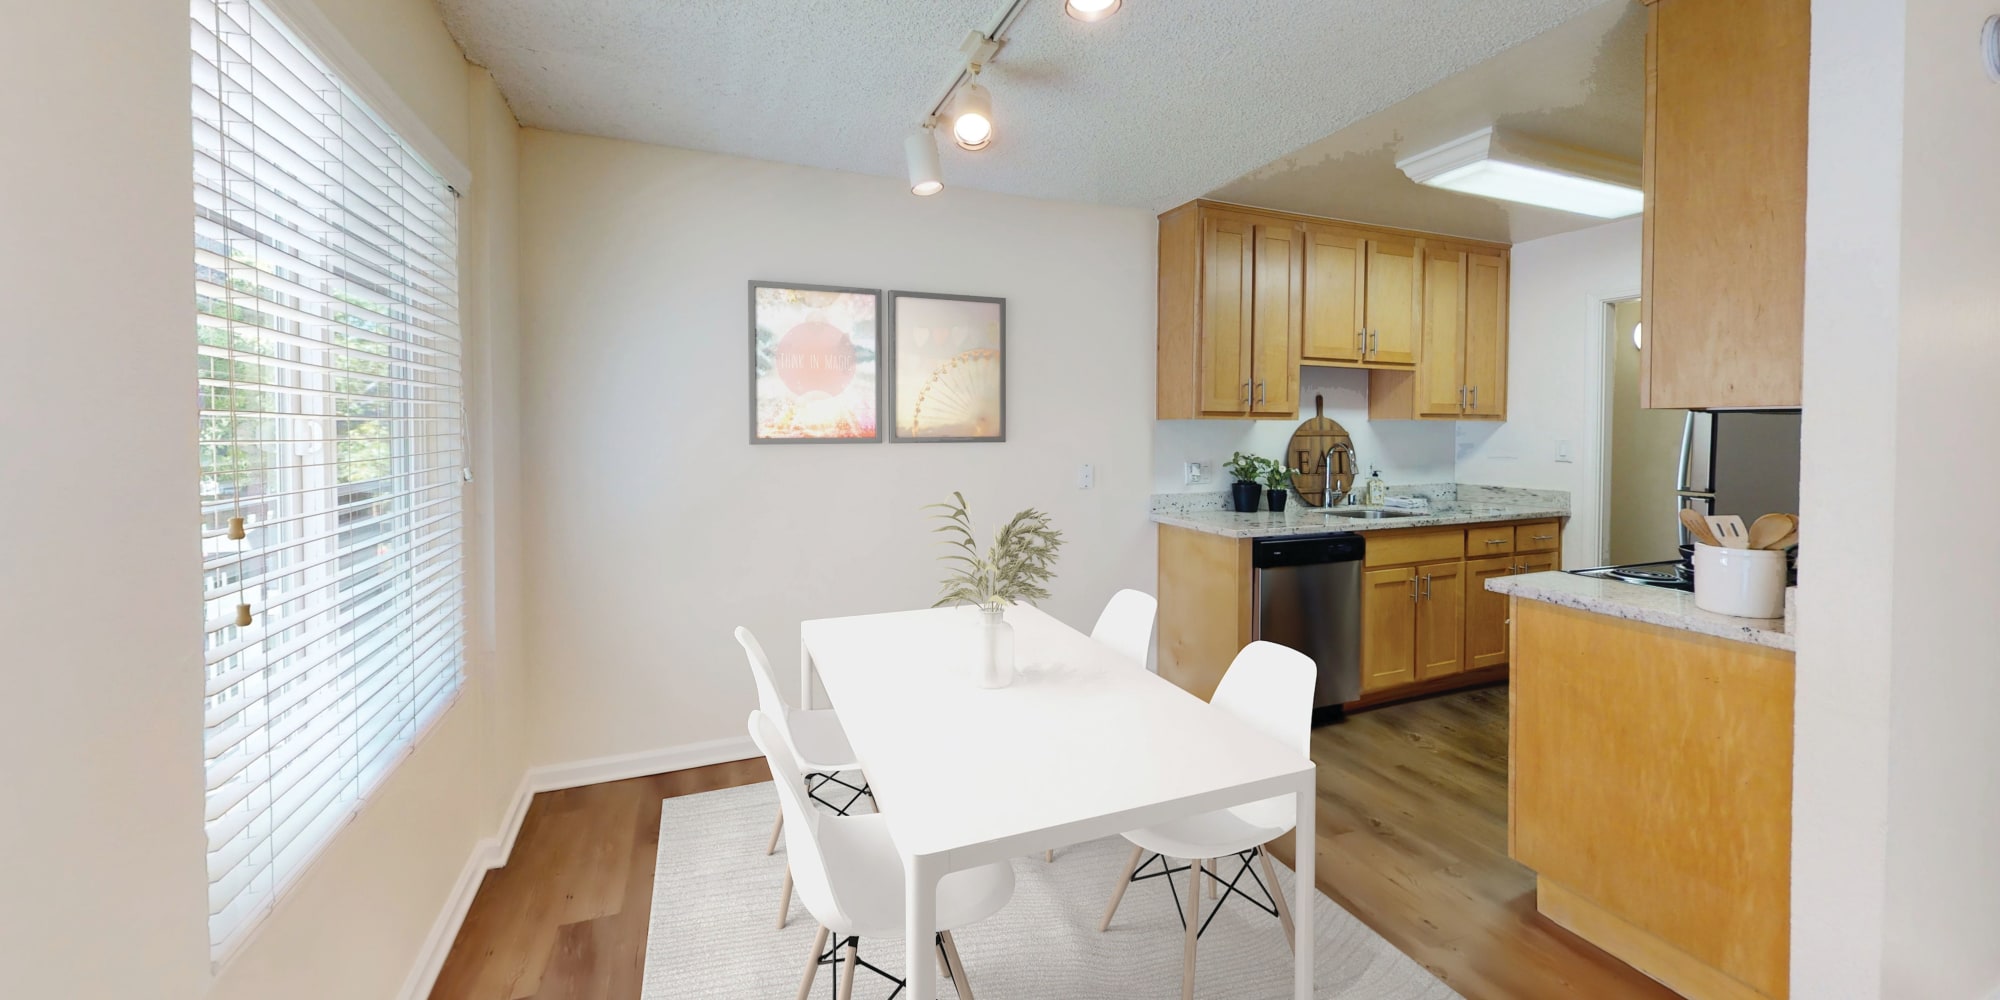 Dining nook and kitchen in a model apartment at Pleasanton Glen Apartment Homes in Pleasanton, California